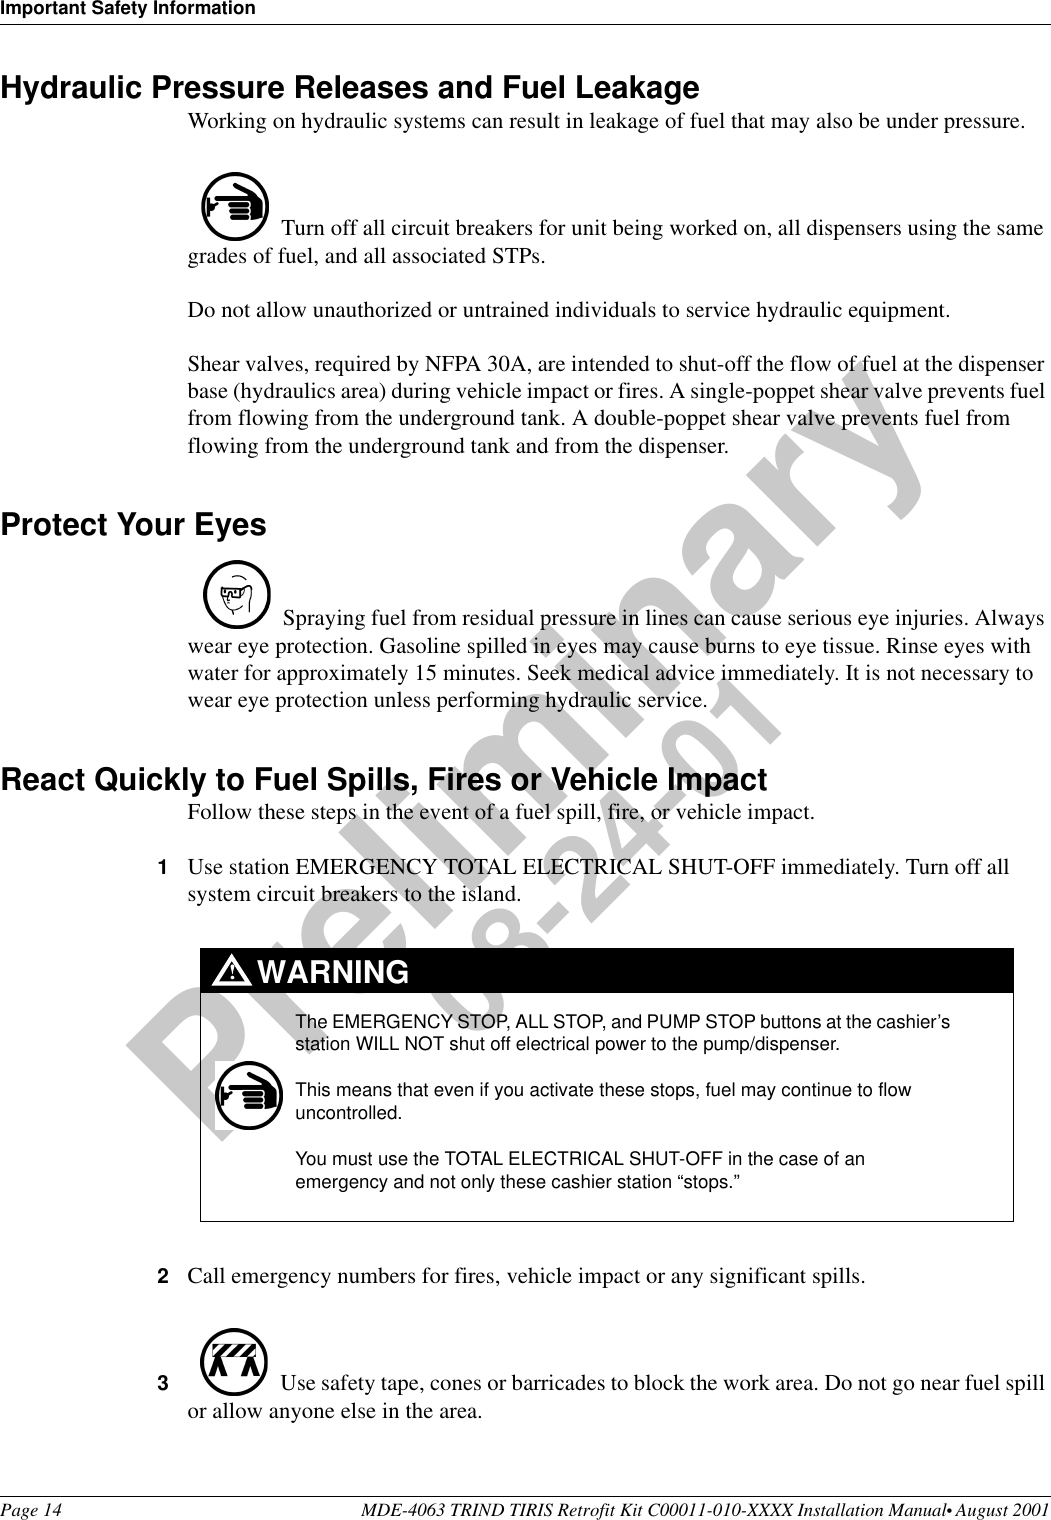 Important Safety InformationPage 14 MDE-4063 TRIND TIRIS Retrofit Kit C00011-010-XXXX Installation Manual• August 2001Preliminary08-24-01Hydraulic Pressure Releases and Fuel LeakageWorking on hydraulic systems can result in leakage of fuel that may also be under pressure. Turn off all circuit breakers for unit being worked on, all dispensers using the same grades of fuel, and all associated STPs. Do not allow unauthorized or untrained individuals to service hydraulic equipment. Shear valves, required by NFPA 30A, are intended to shut-off the flow of fuel at the dispenser base (hydraulics area) during vehicle impact or fires. A single-poppet shear valve prevents fuel from flowing from the underground tank. A double-poppet shear valve prevents fuel from flowing from the underground tank and from the dispenser.Protect Your Eyes Spraying fuel from residual pressure in lines can cause serious eye injuries. Always wear eye protection. Gasoline spilled in eyes may cause burns to eye tissue. Rinse eyes with water for approximately 15 minutes. Seek medical advice immediately. It is not necessary to wear eye protection unless performing hydraulic service.React Quickly to Fuel Spills, Fires or Vehicle ImpactFollow these steps in the event of a fuel spill, fire, or vehicle impact.1Use station EMERGENCY TOTAL ELECTRICAL SHUT-OFF immediately. Turn off all system circuit breakers to the island.2Call emergency numbers for fires, vehicle impact or any significant spills. 3Use safety tape, cones or barricades to block the work area. Do not go near fuel spill or allow anyone else in the area. The EMERGENCY STOP, ALL STOP, and PUMP STOP buttons at the cashier’s station WILL NOT shut off electrical power to the pump/dispenser. This means that even if you activate these stops, fuel may continue to flow uncontrolled. You must use the TOTAL ELECTRICAL SHUT-OFF in the case of an emergency and not only these cashier station “stops.”WARNING!